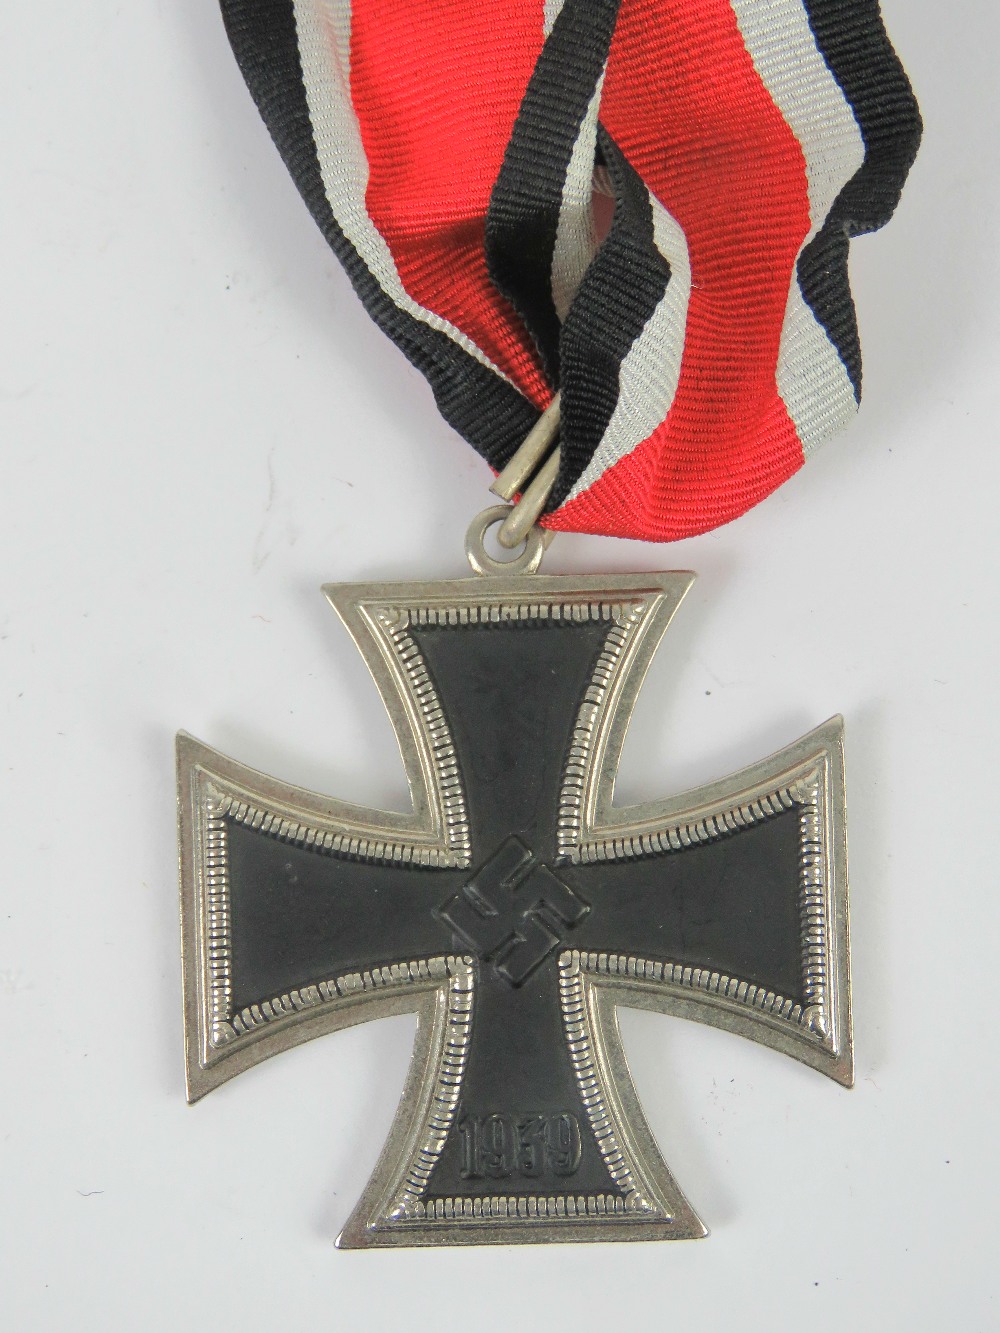 A reproduction WWII German Iron Cross medal.